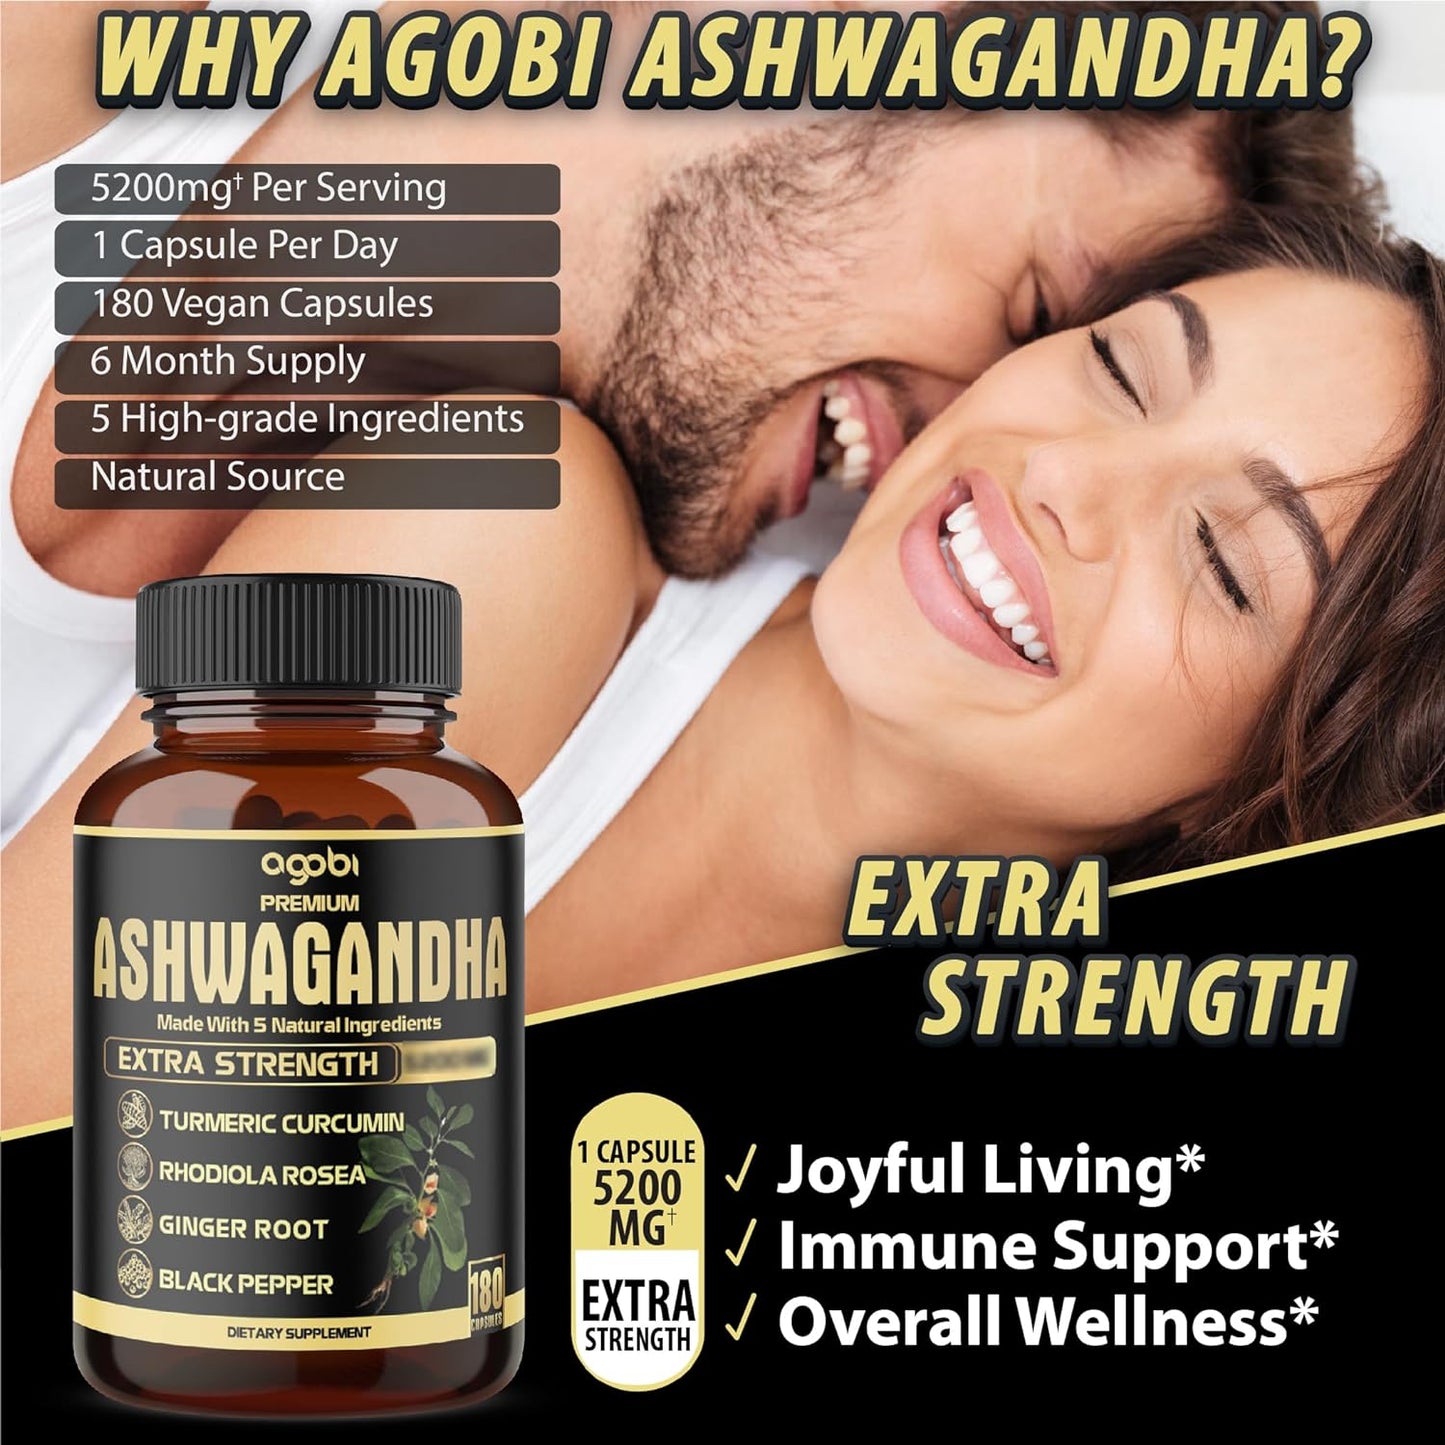 5In1 Premium Ashwagandha Capsules - High Extracted Equivalents to 5200Mg Powder - Added Turmeric, Rhodiola Rosea, Ginger, Black Pepper - Strength, Spirit & Immune Support - 180 Caps for 6 Months